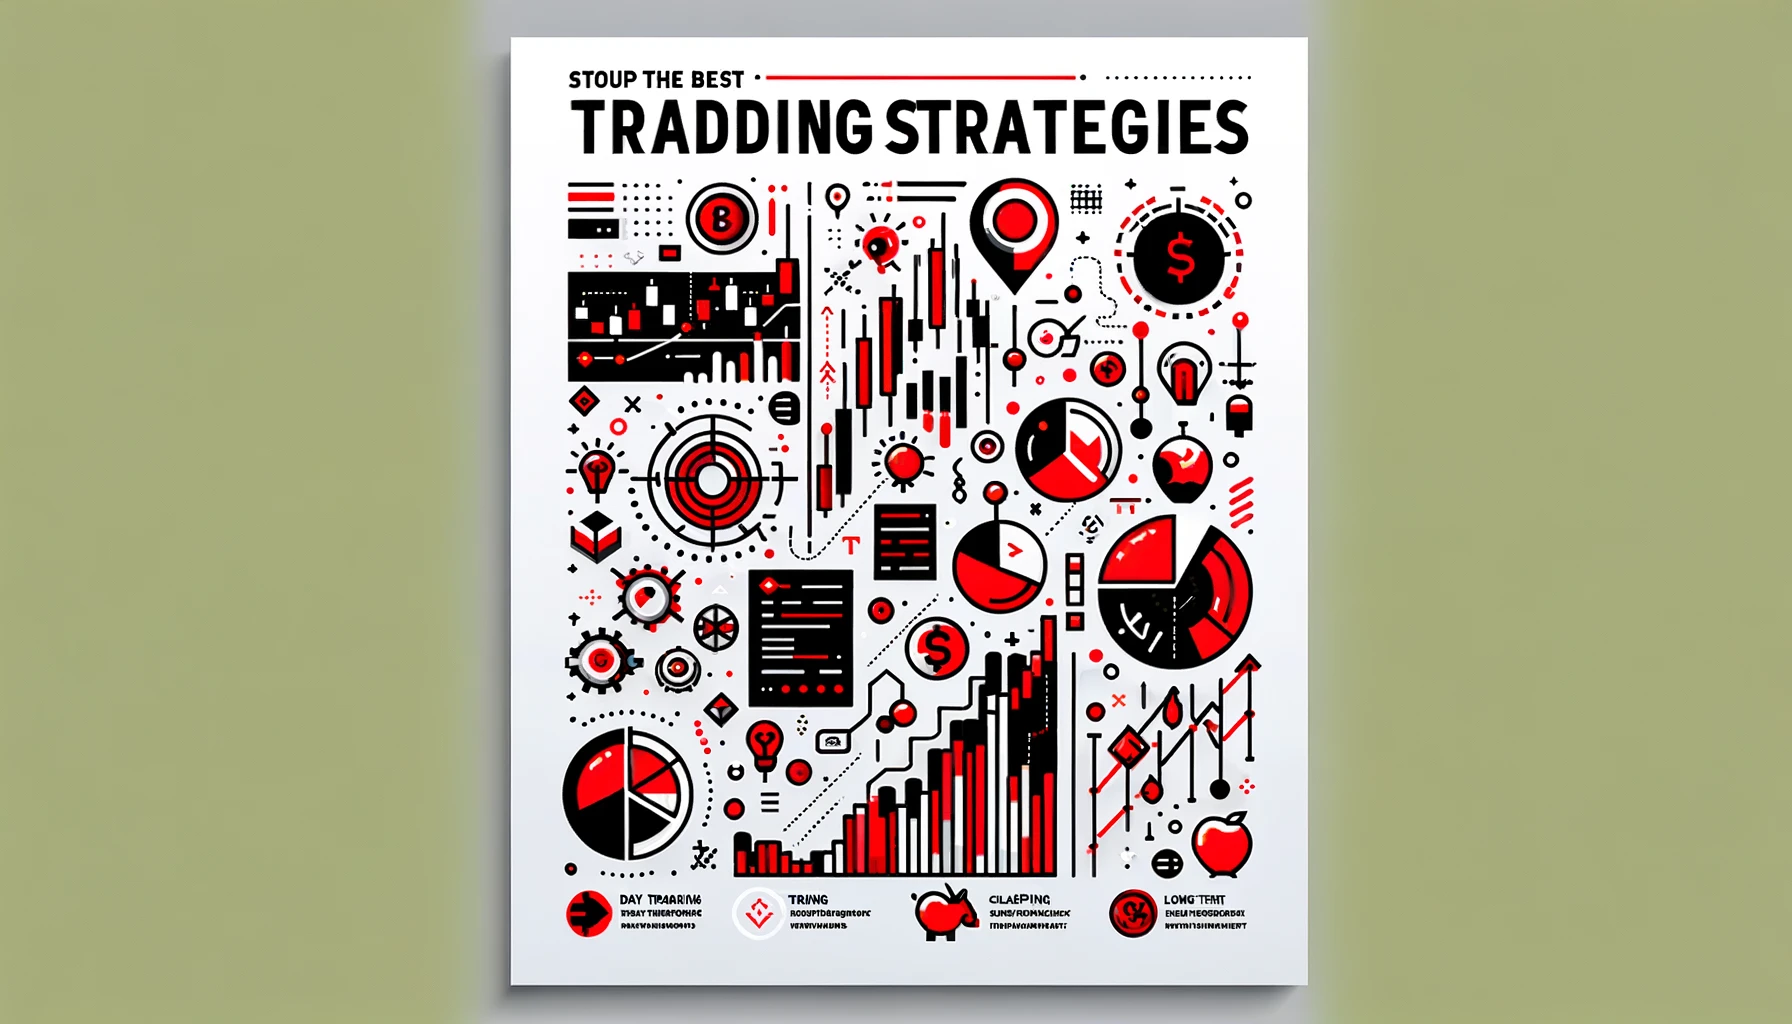 Strategizing Millions: Learning from a Trading Titan’s Approach